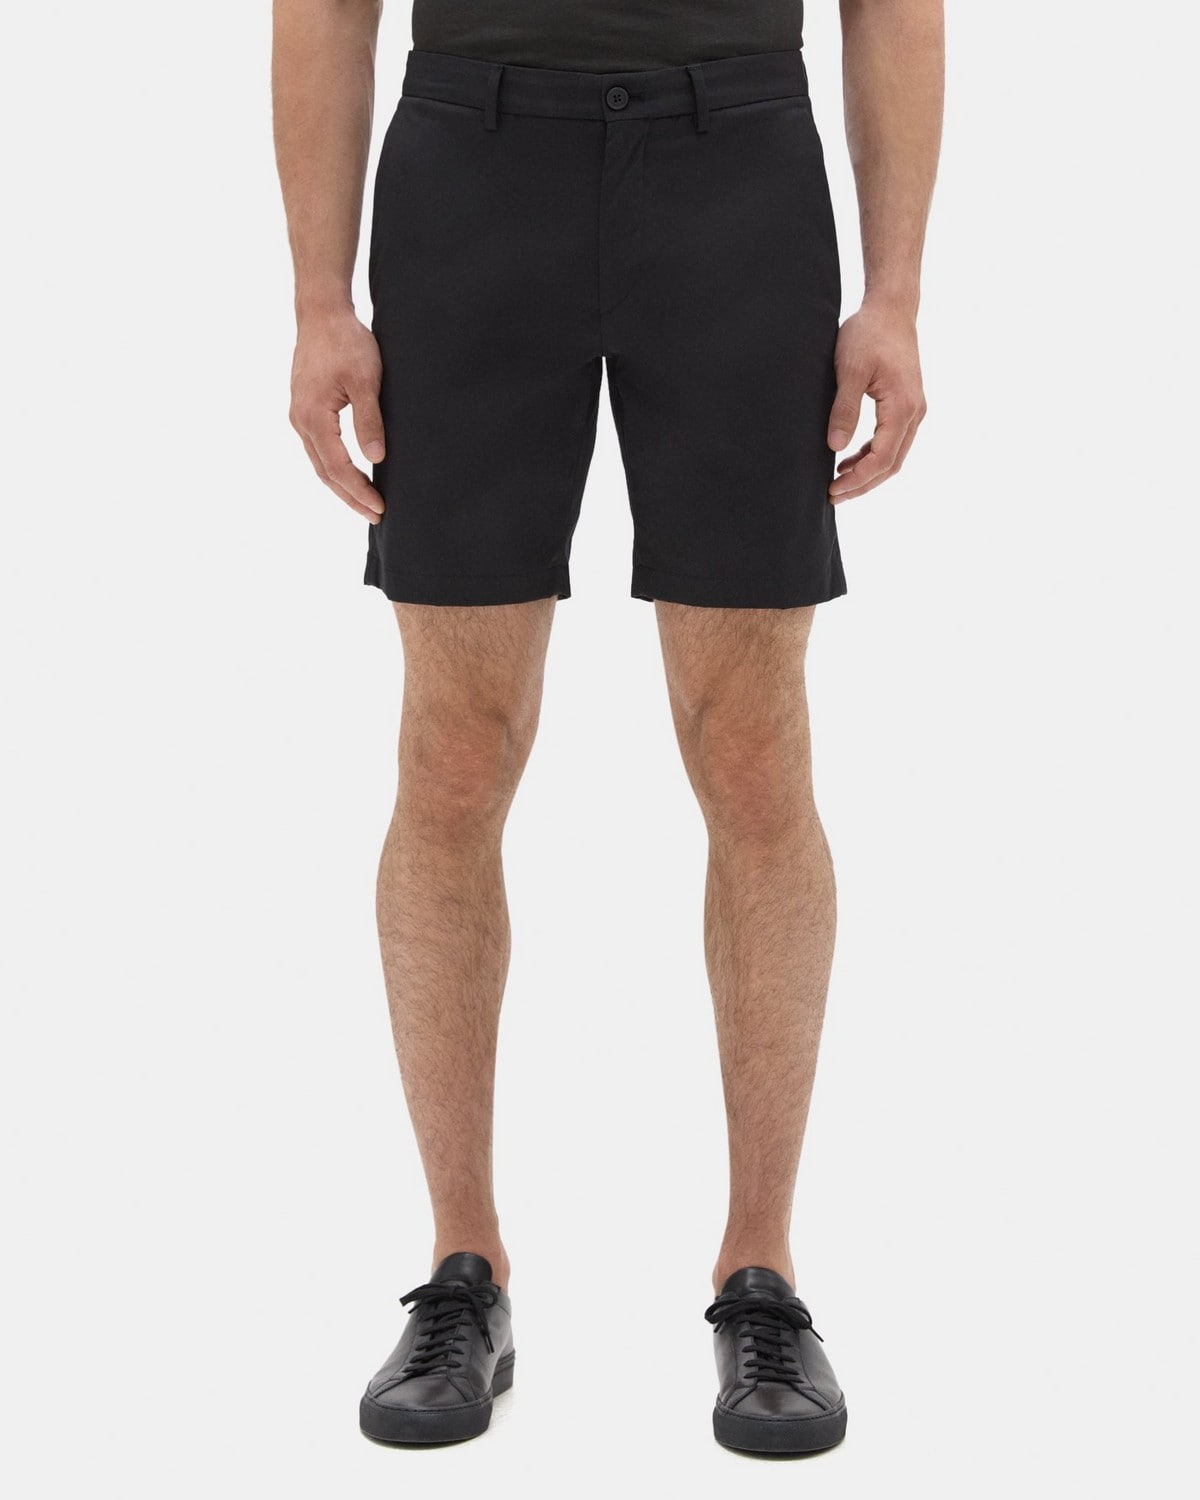 Theory Men's Zaine Ascend Tech Flat Front Shorts Navy Size 30 34 38 NWT